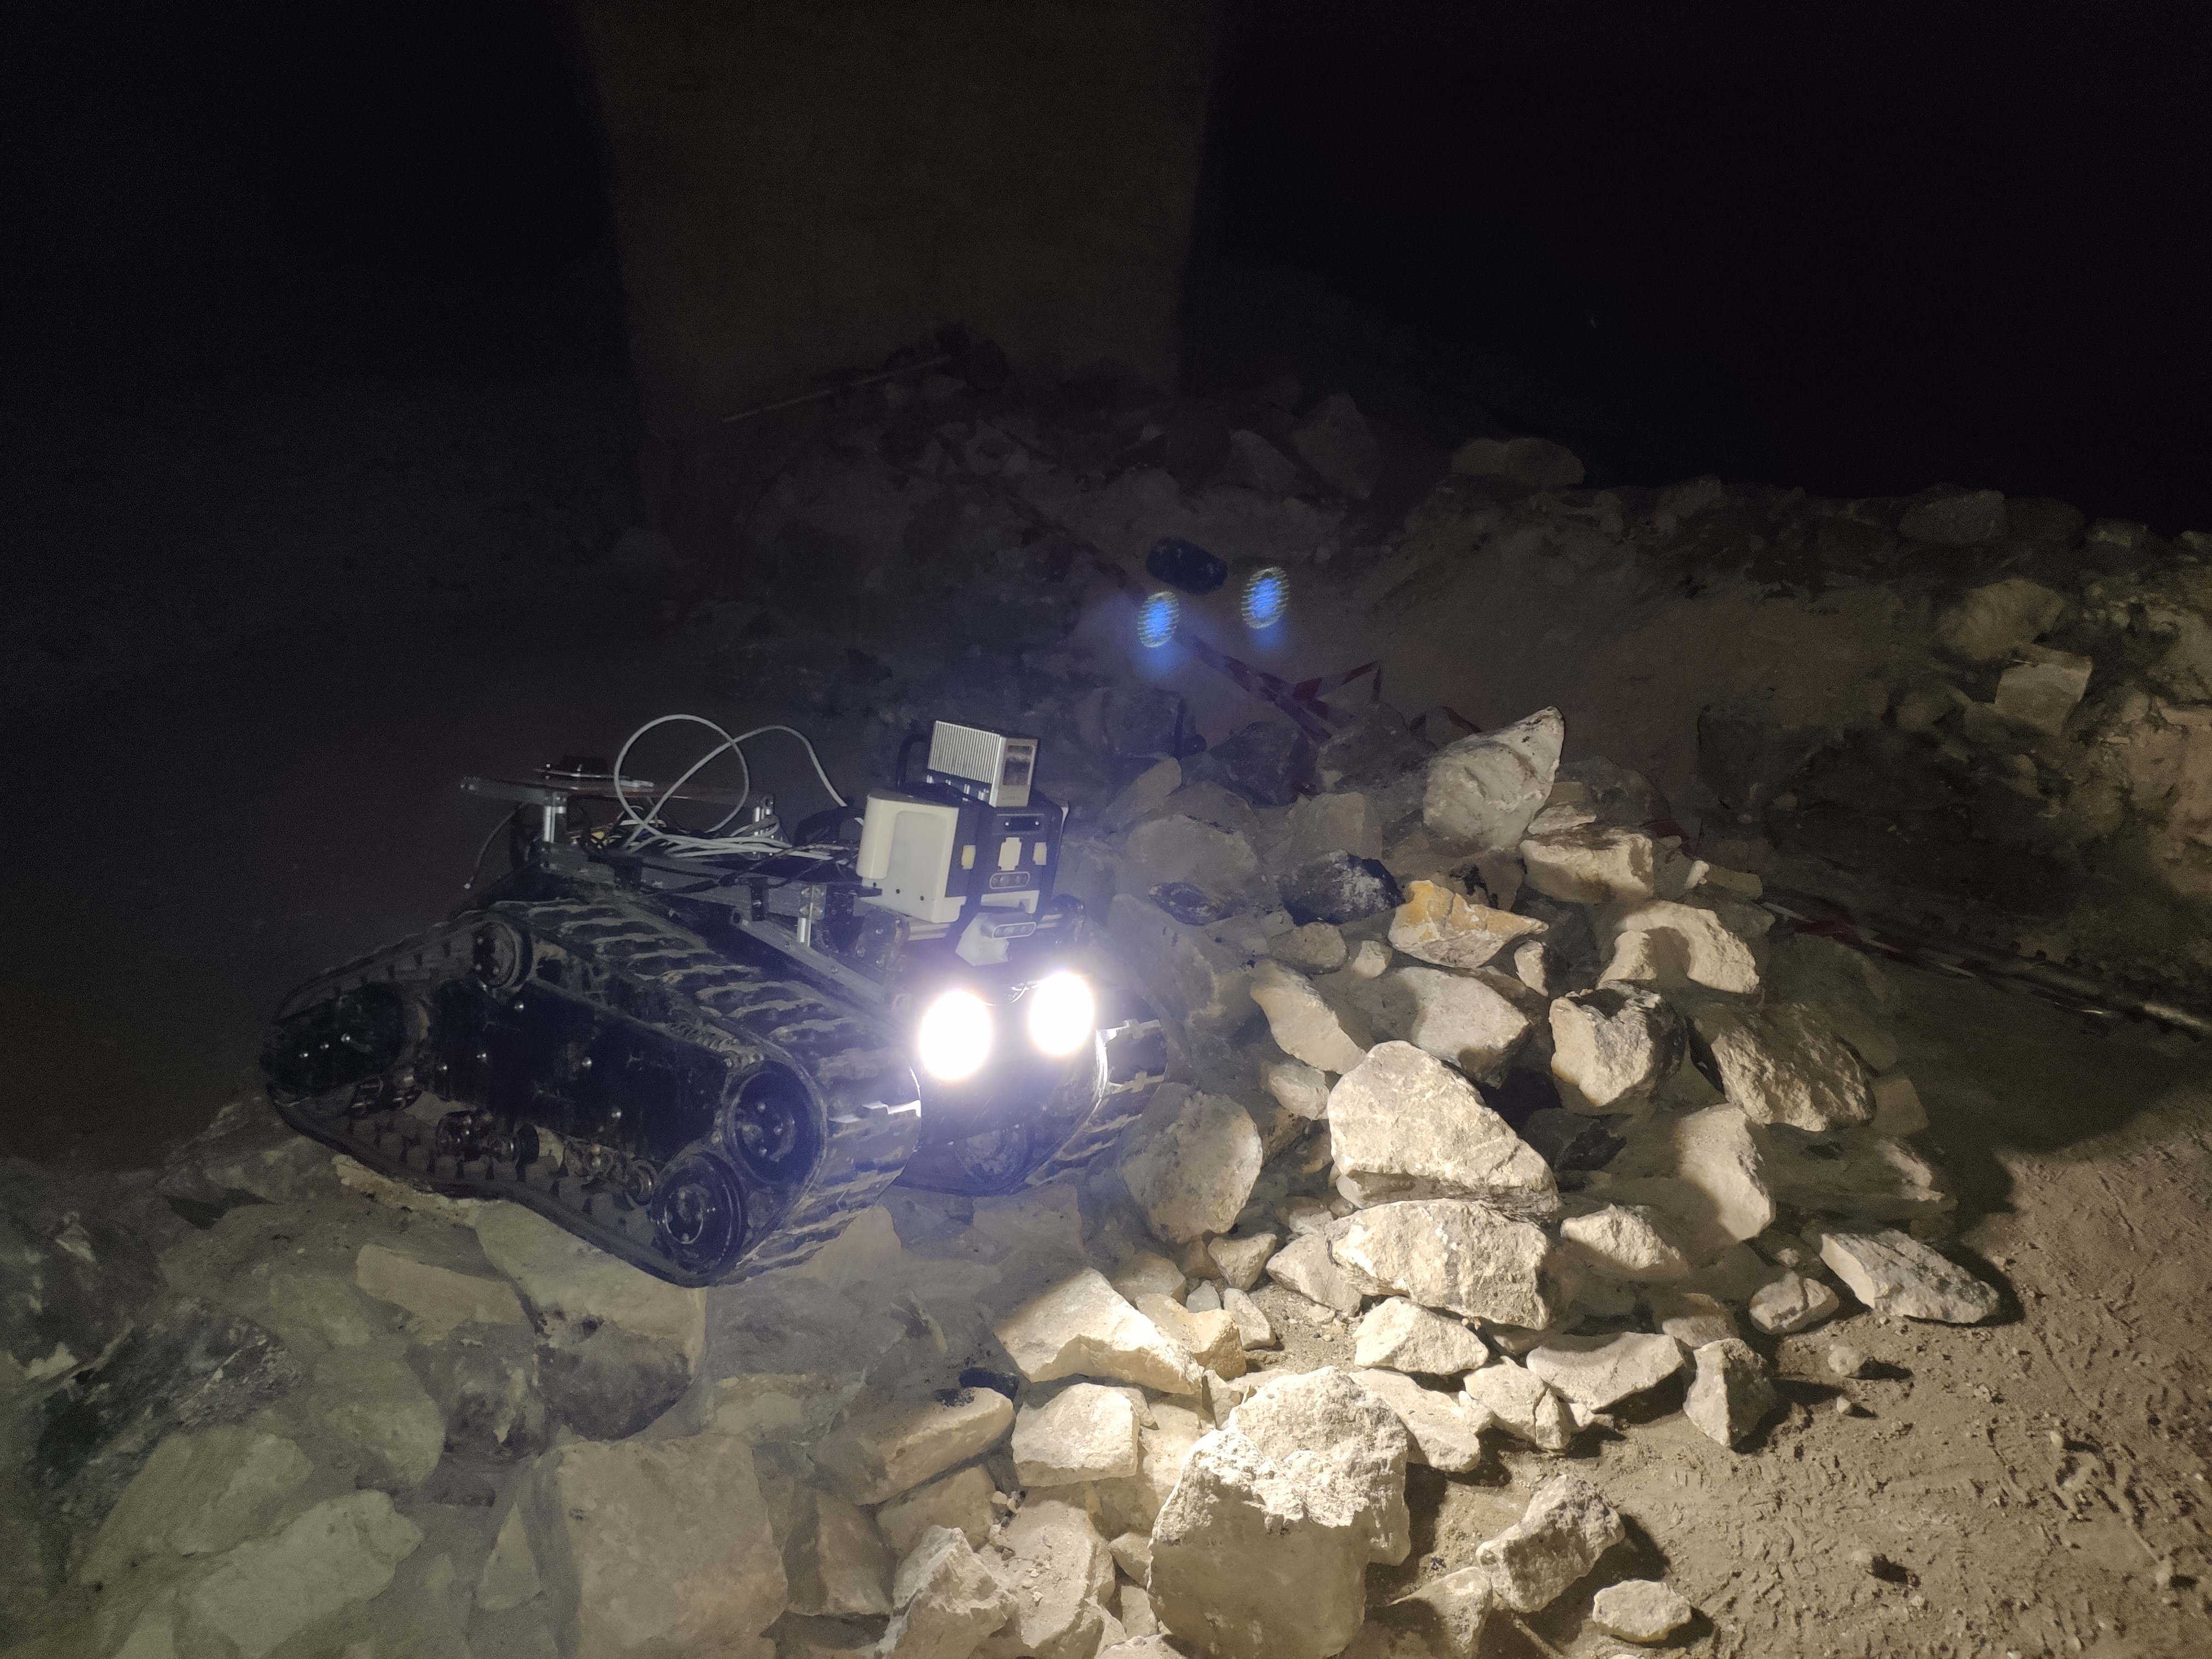 GMV applies robotic technology to prospecting and mapping the moon